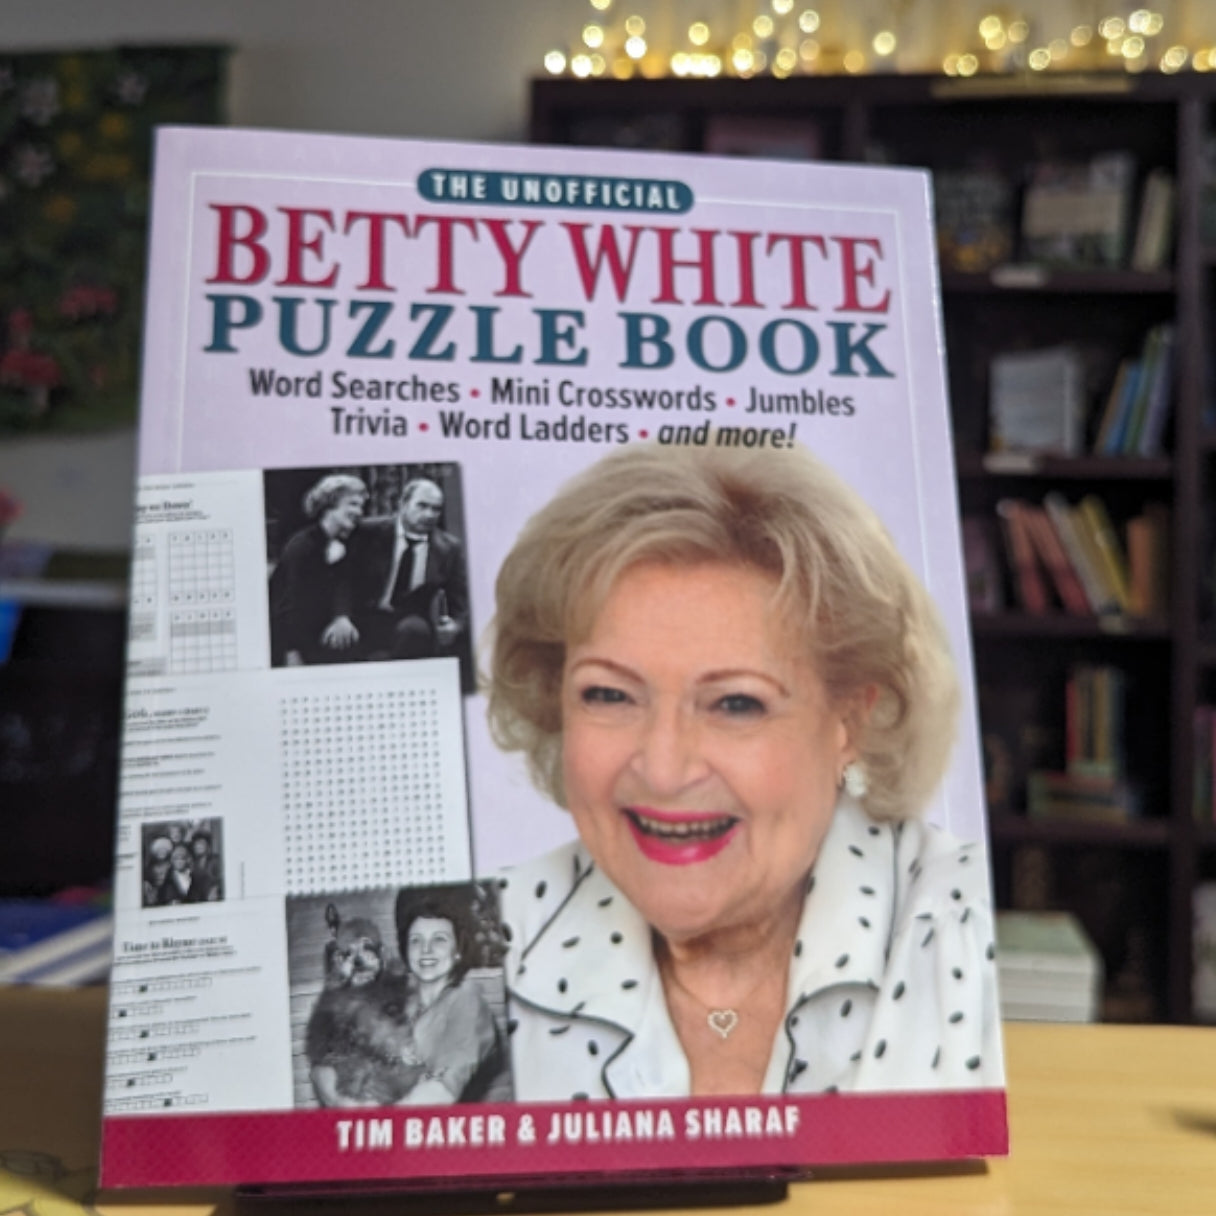 The Unofficial Betty White Puzzle Book: Word Searches – Mini Crosswords – Jumbles – Trivia – Word Ladders – And more!